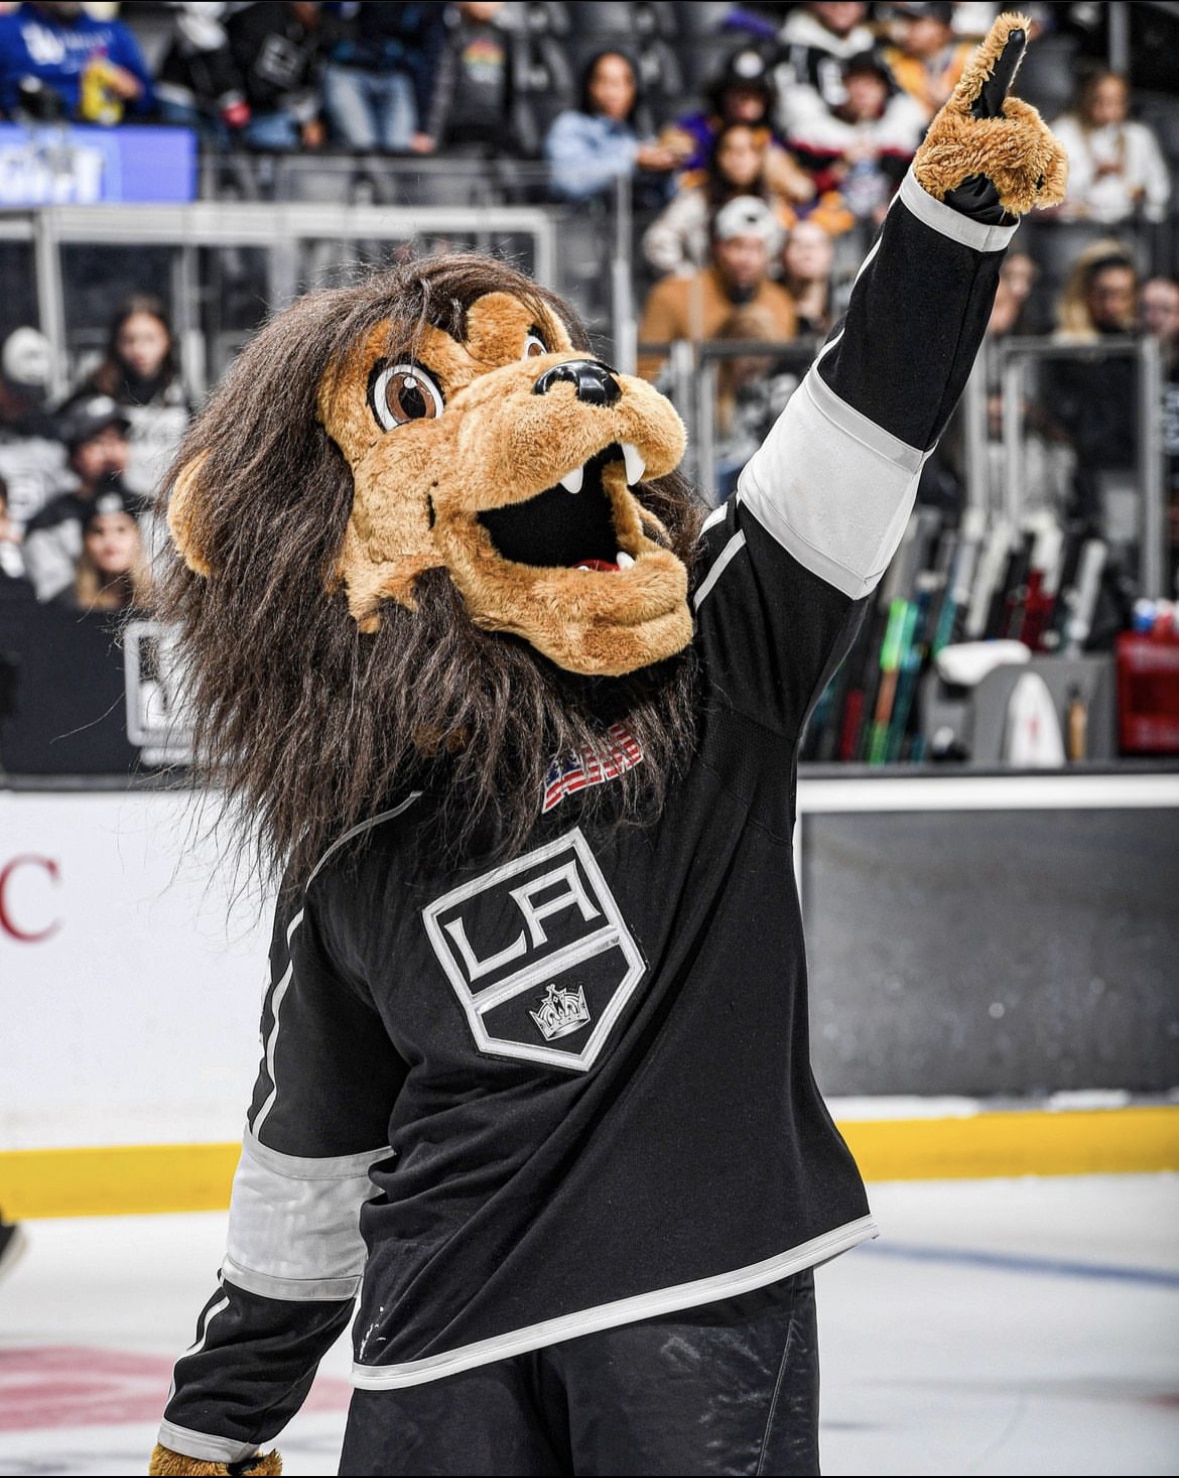 Kings' Bailey named most awesome mascot in sports - The Hockey News